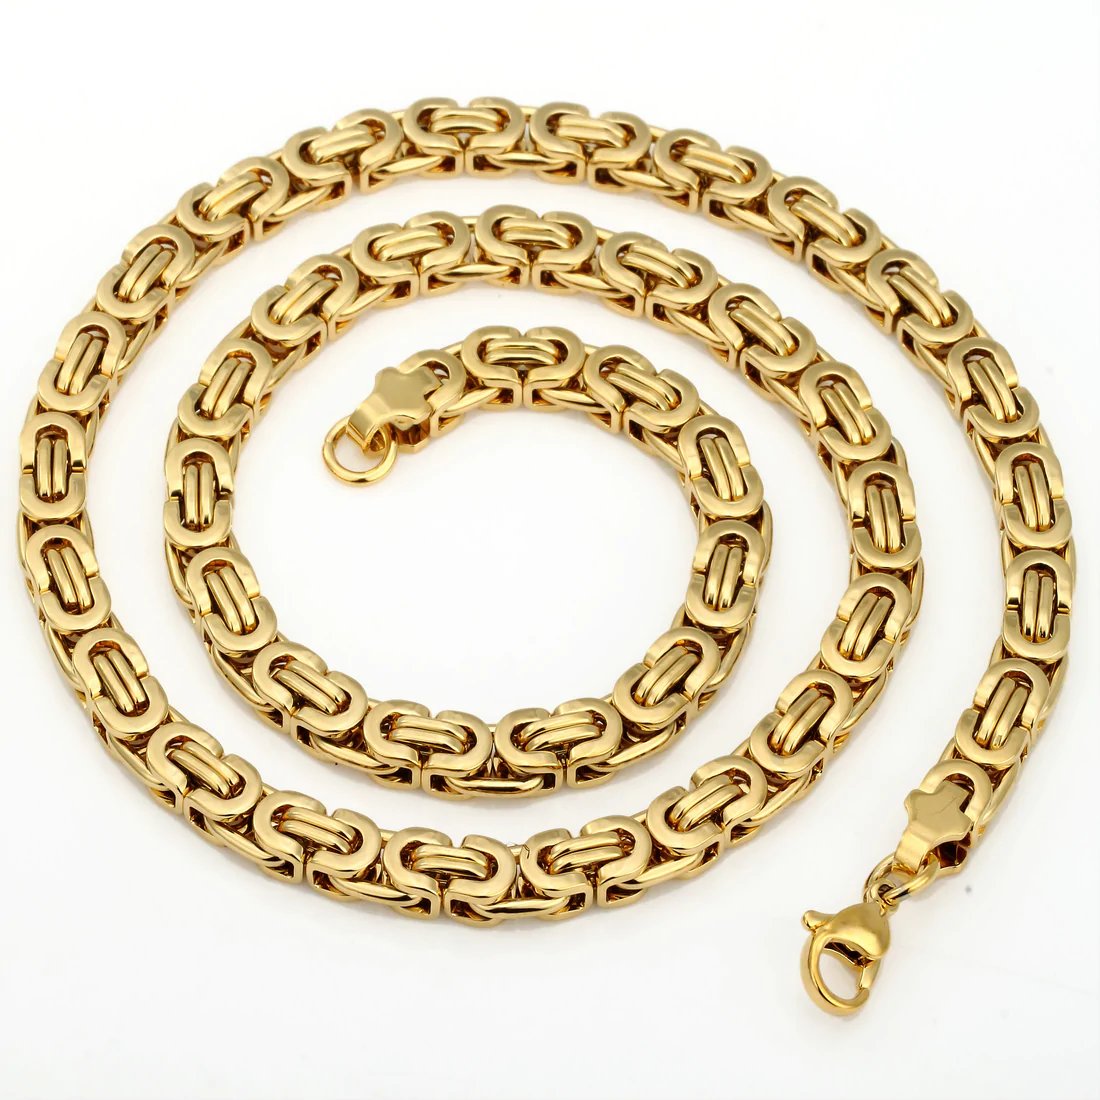 7mm High quality Flat Byzantine Link Necklace For Mens Boys Gold Color @mensfashionmag #go2store #mensjewelry #mensfashion #jewelry #handmadejewelry #menstyle #fashion #mensstyle #menswear #mensbracelets #handmade #mensaccessories #rings go2store.us/products/7mm-h…